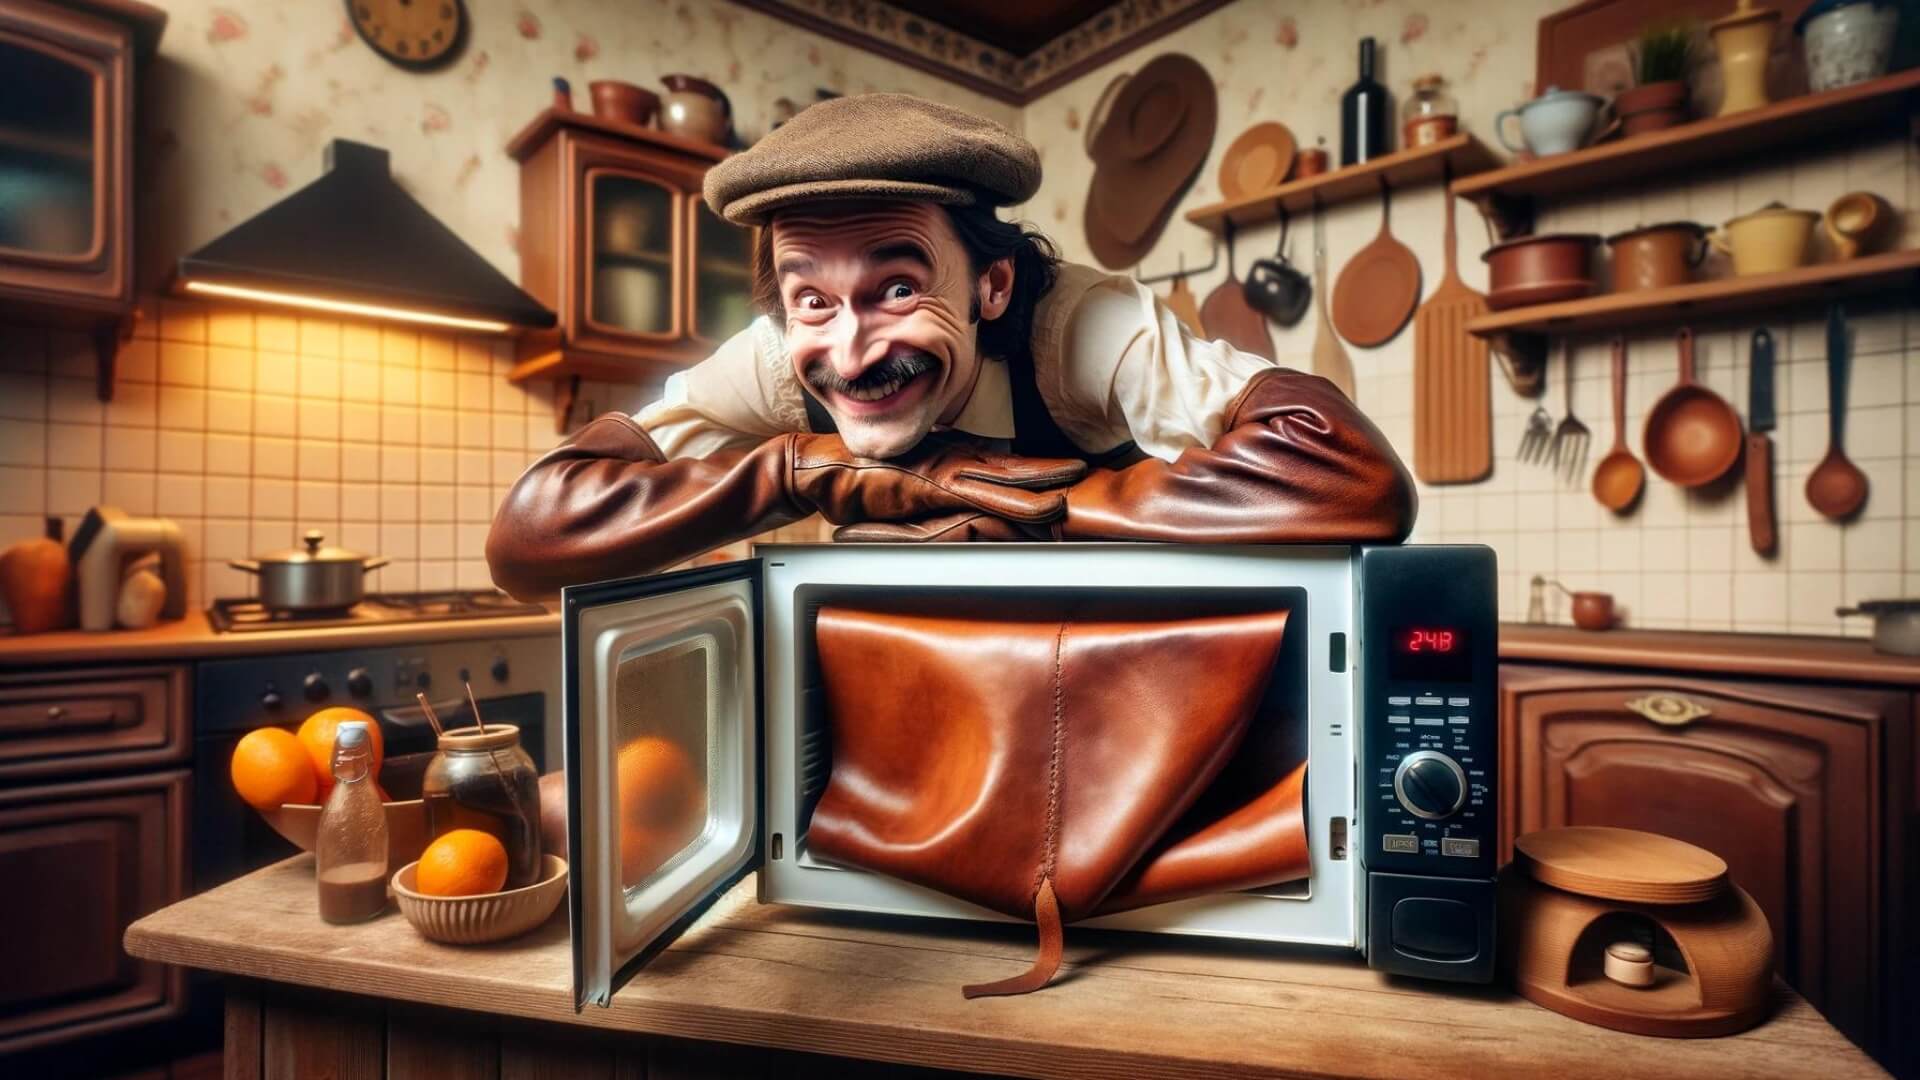 a mischievous smile on a man's face as he microwaves leather to dry it out